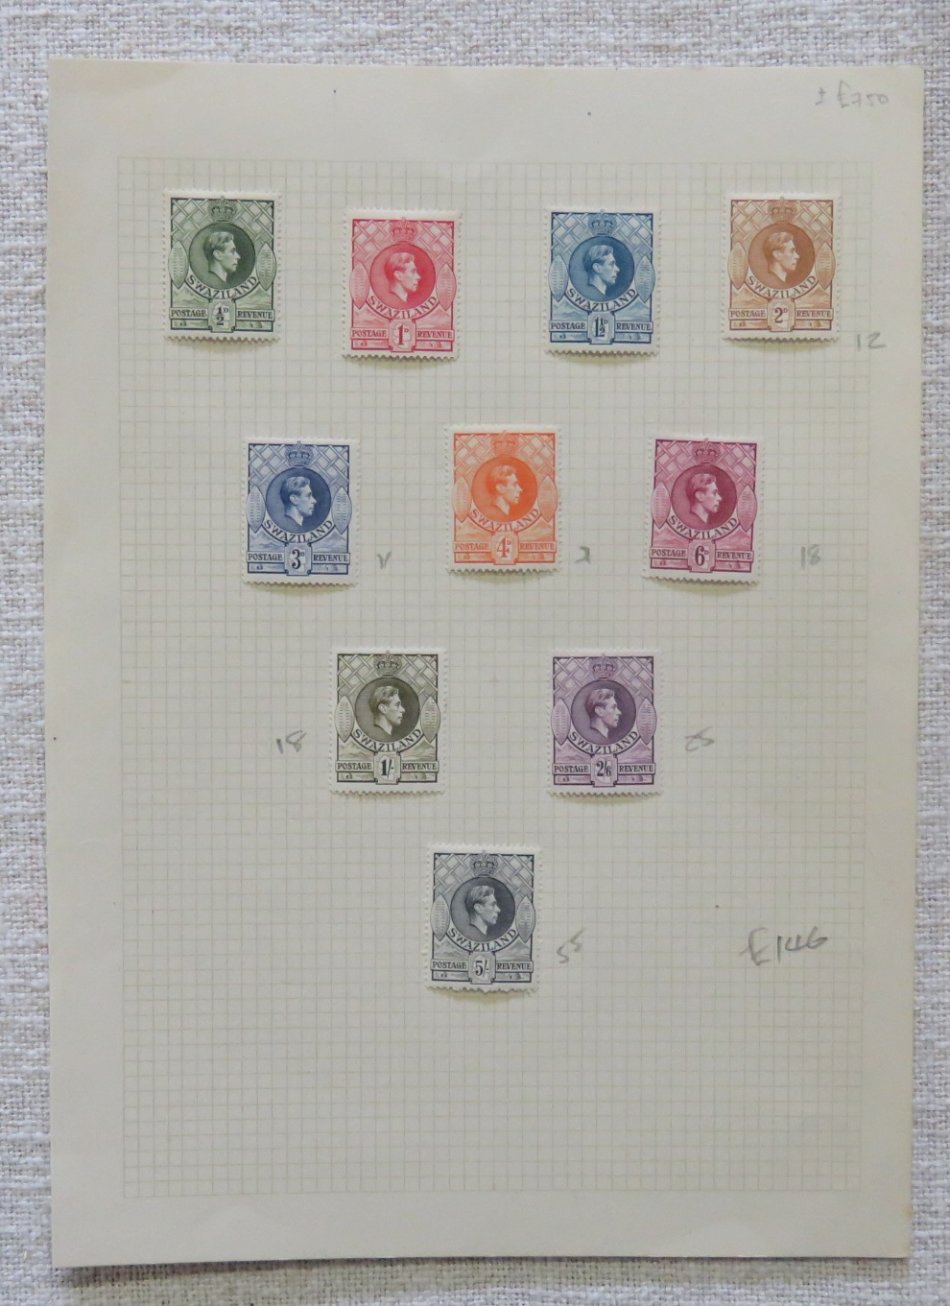 Swaziland SACC 27-SACC 36 mounted mint lot of 10 stamps